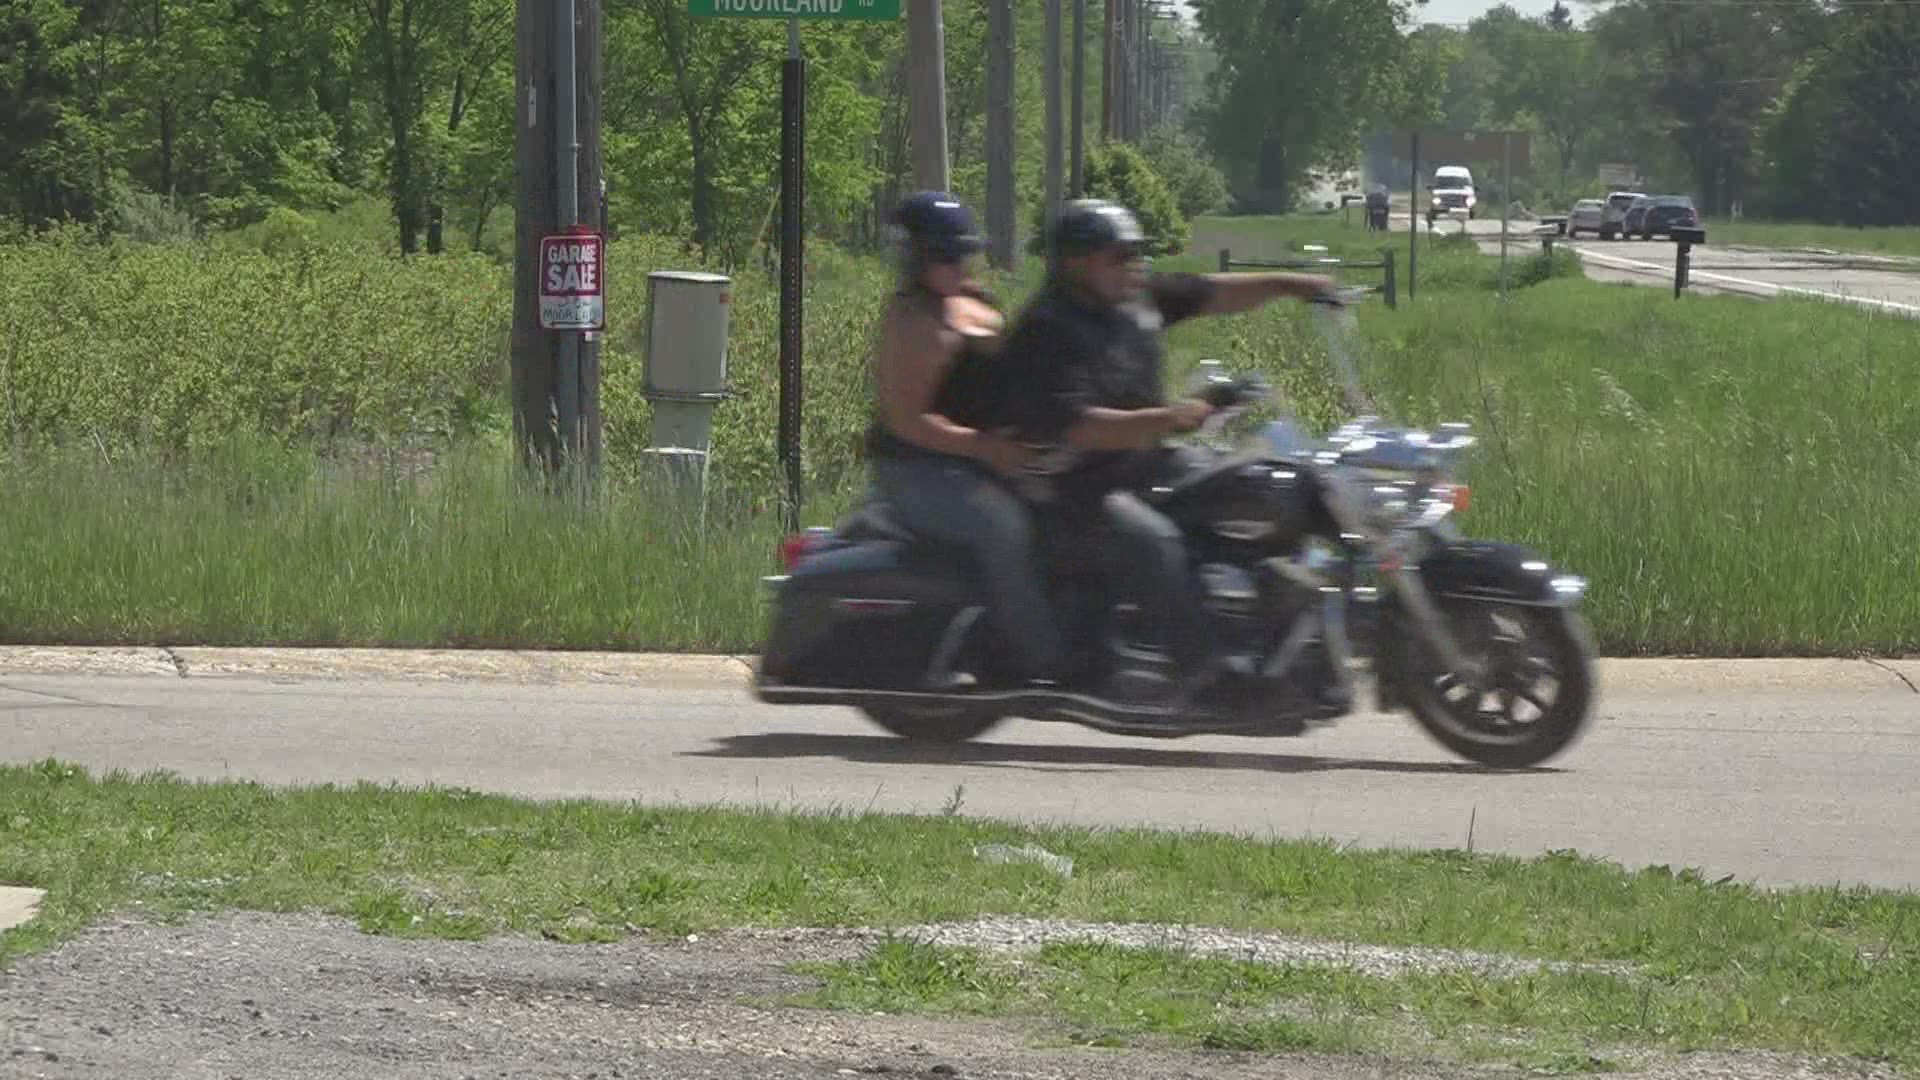 In states like Michigan, there's usually an up-tick in motorcycle crashes when the weather gets warmer.